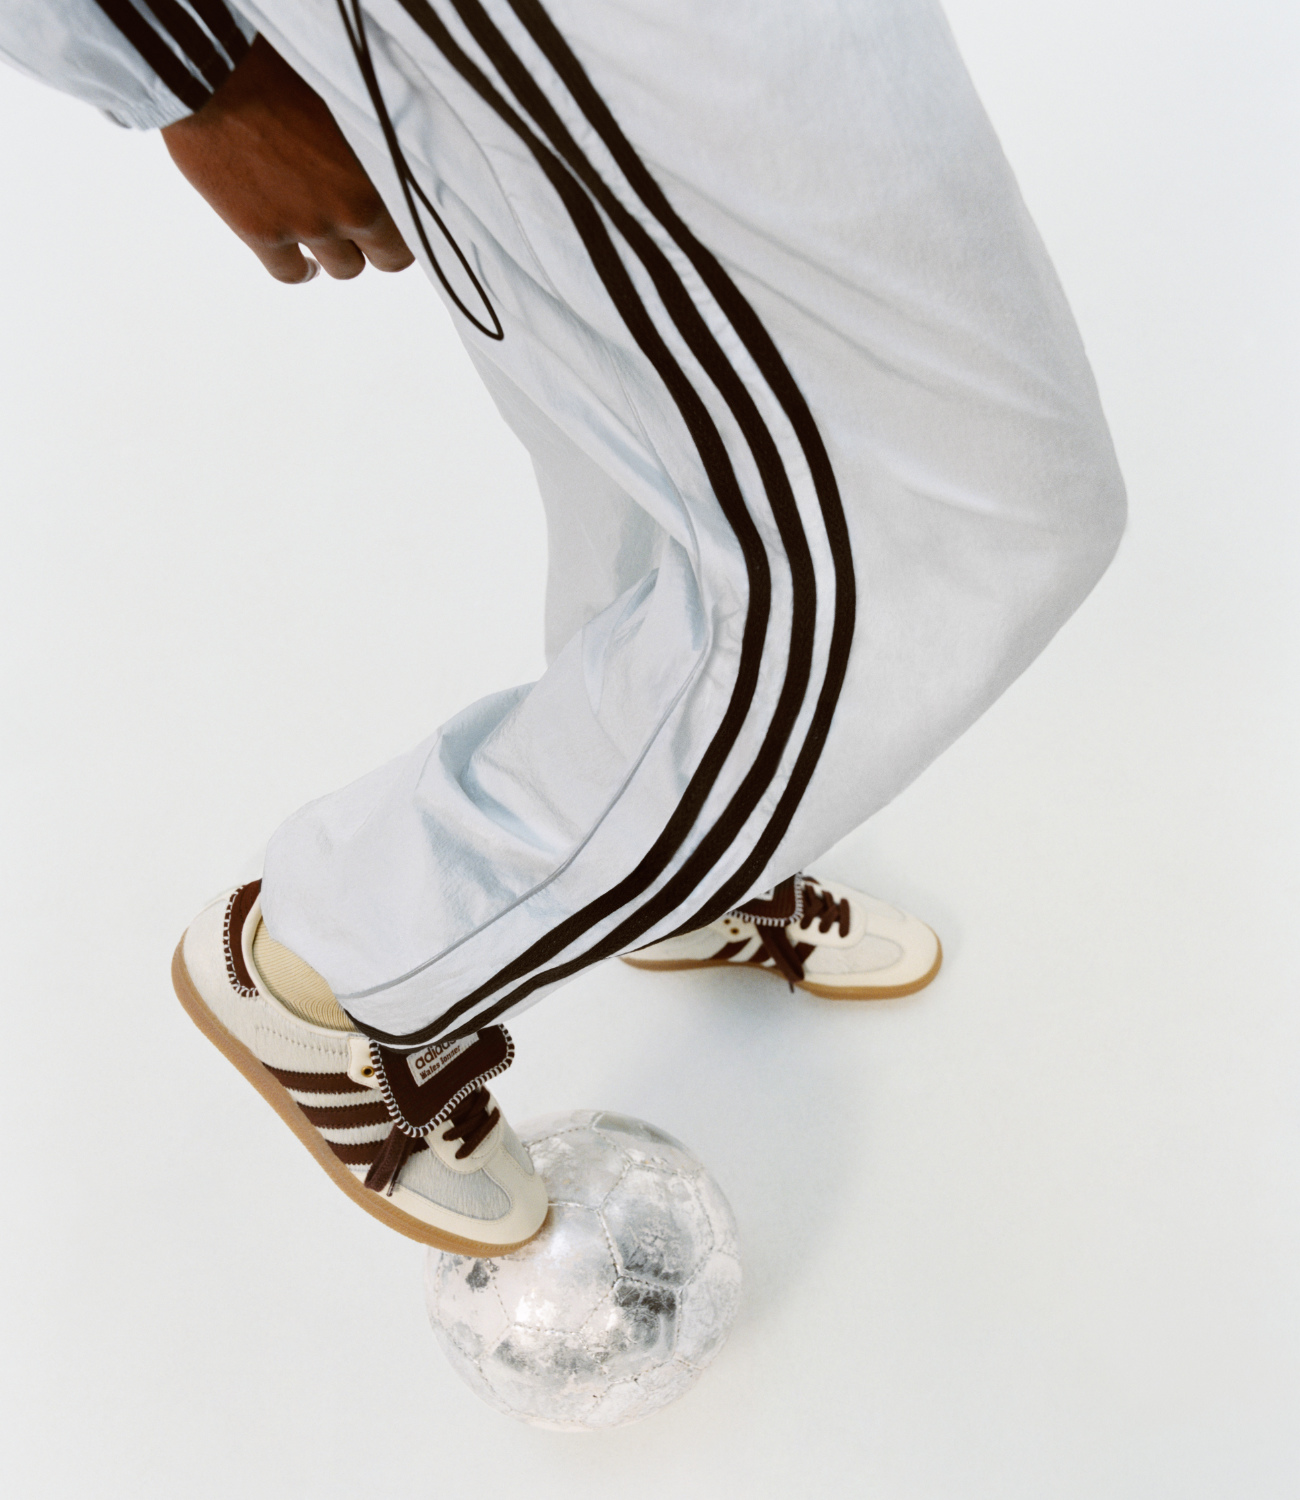 Wales Bonner & adidas Originals have reunited for another take on the Samba for Fall/Winter 2023.